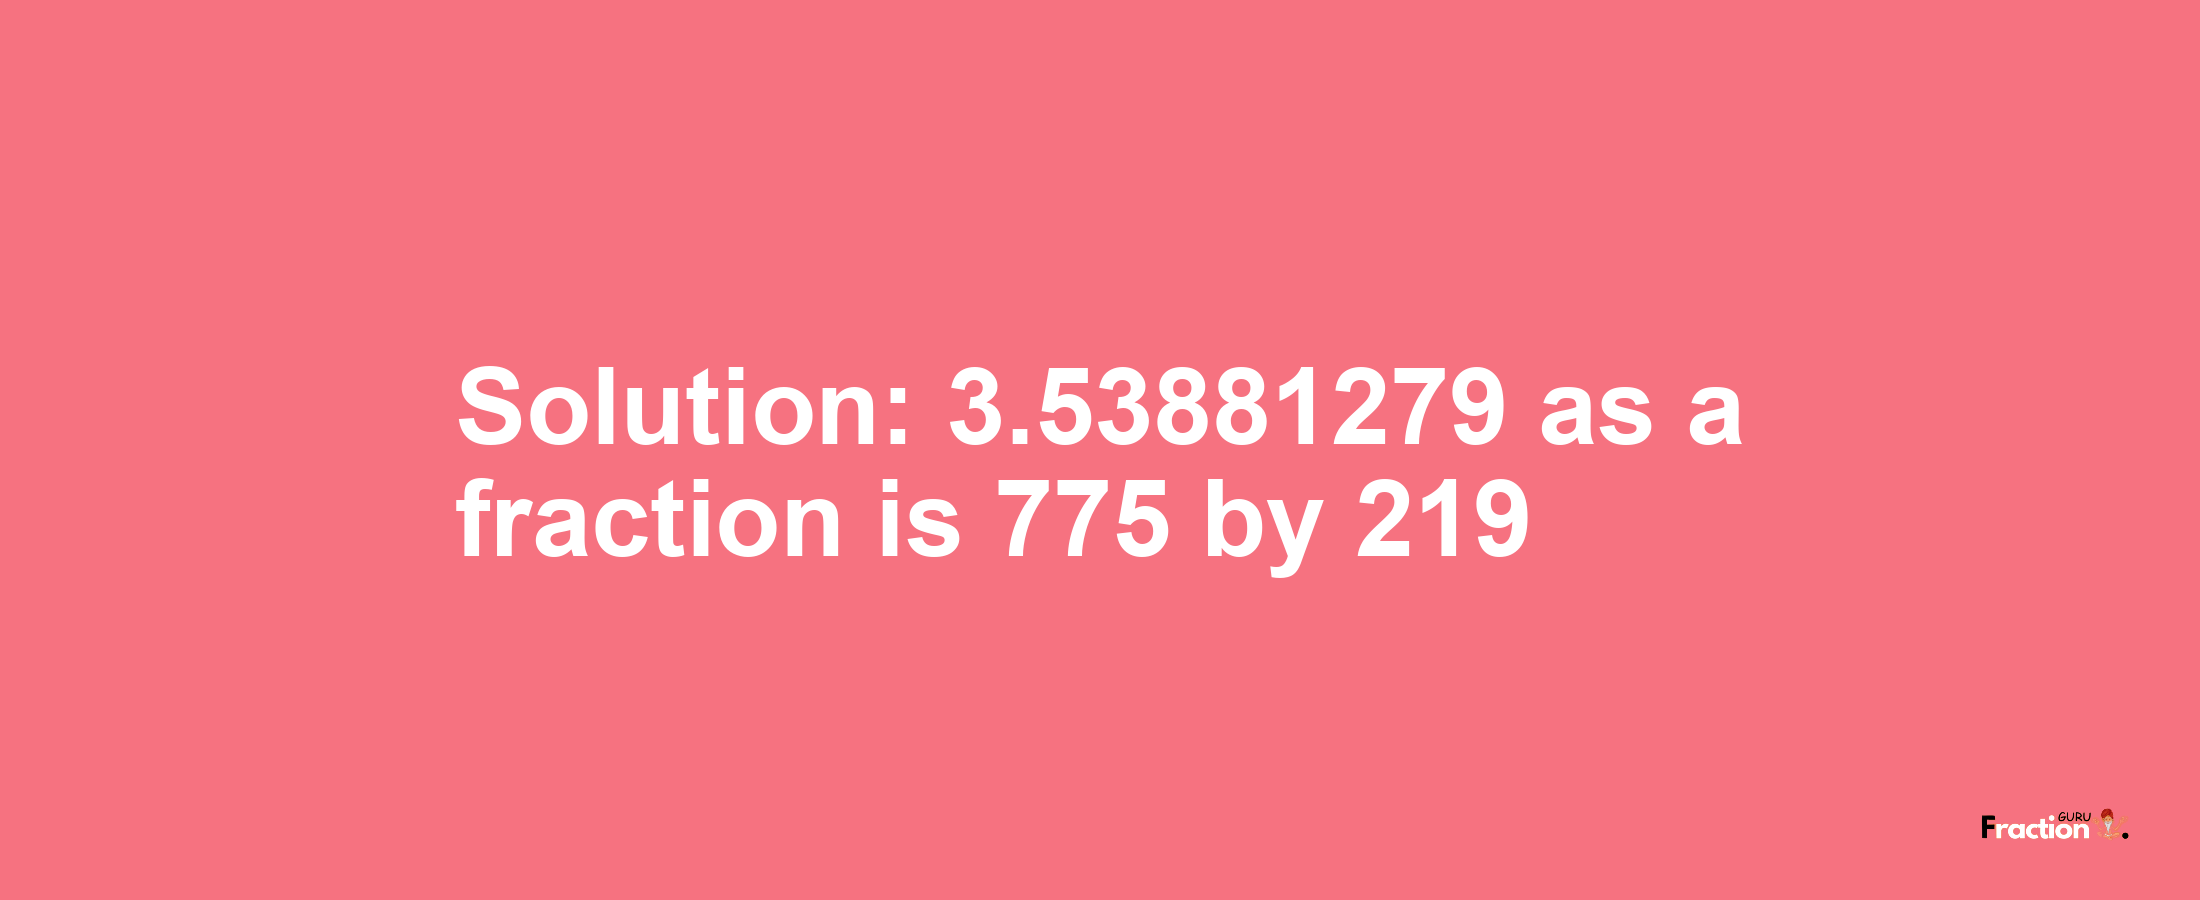 Solution:3.53881279 as a fraction is 775/219